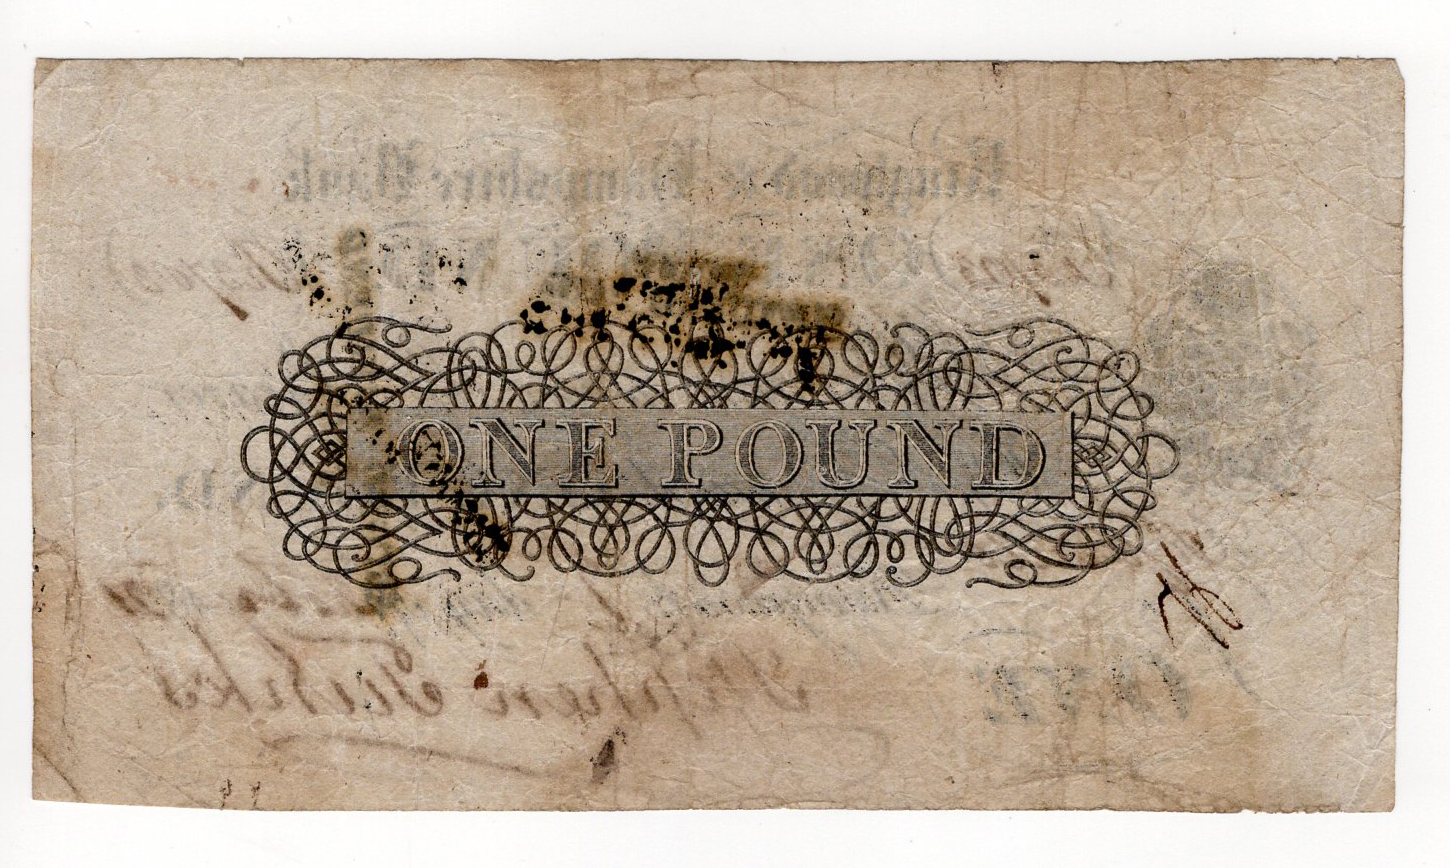 Ringwood & Hampshire Bank 1 Pound dated 1821 for Stephen Tunks, serial No. 3783 (Outing1788a) 2 - Image 2 of 2